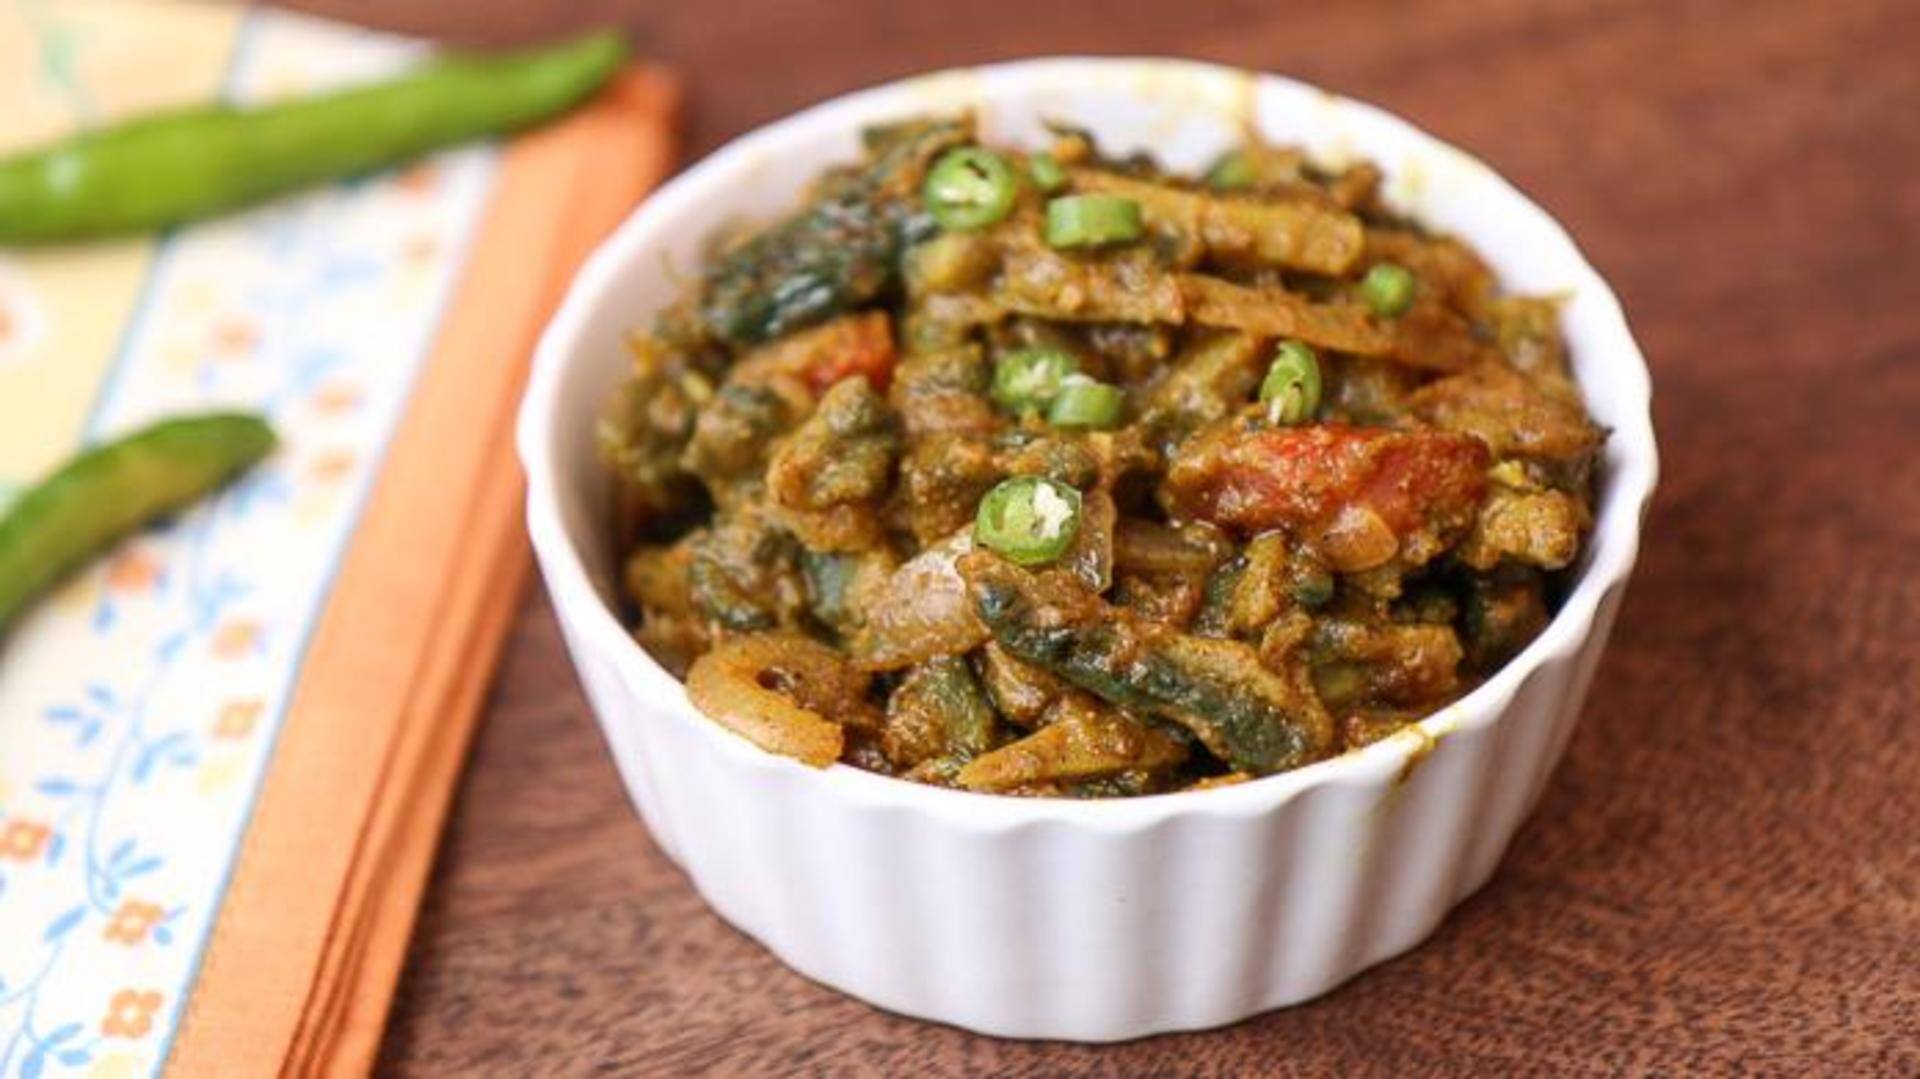 5 karela recipes to try for weeknight dinners 